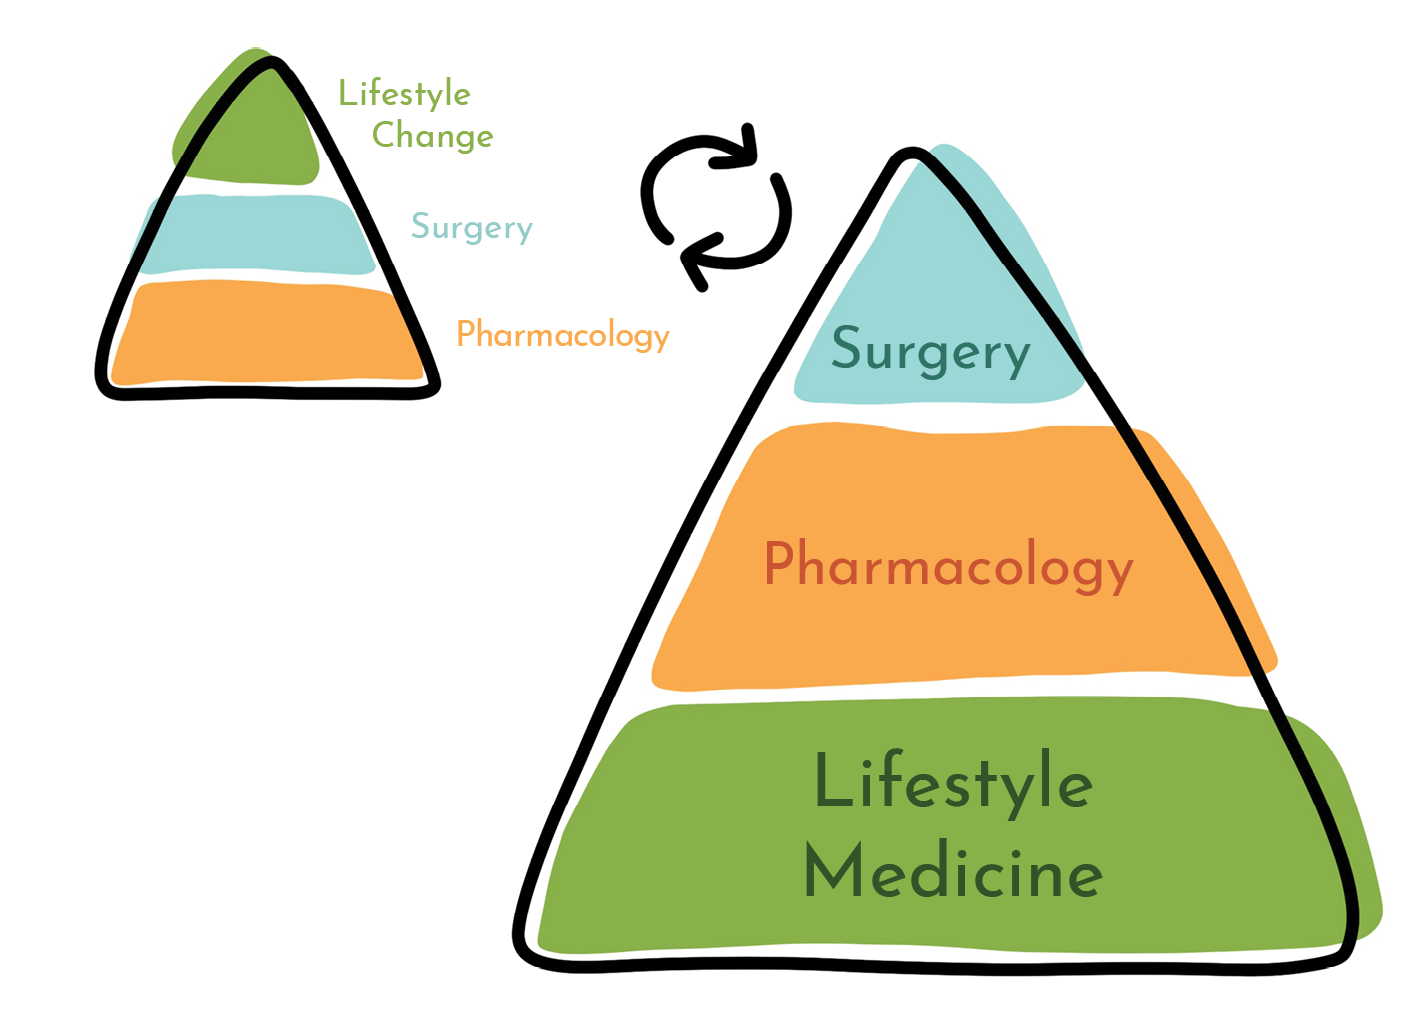 A pyramid where lifestyle medicine is on the bottom, then pharmacology above it, and surgery at the top.